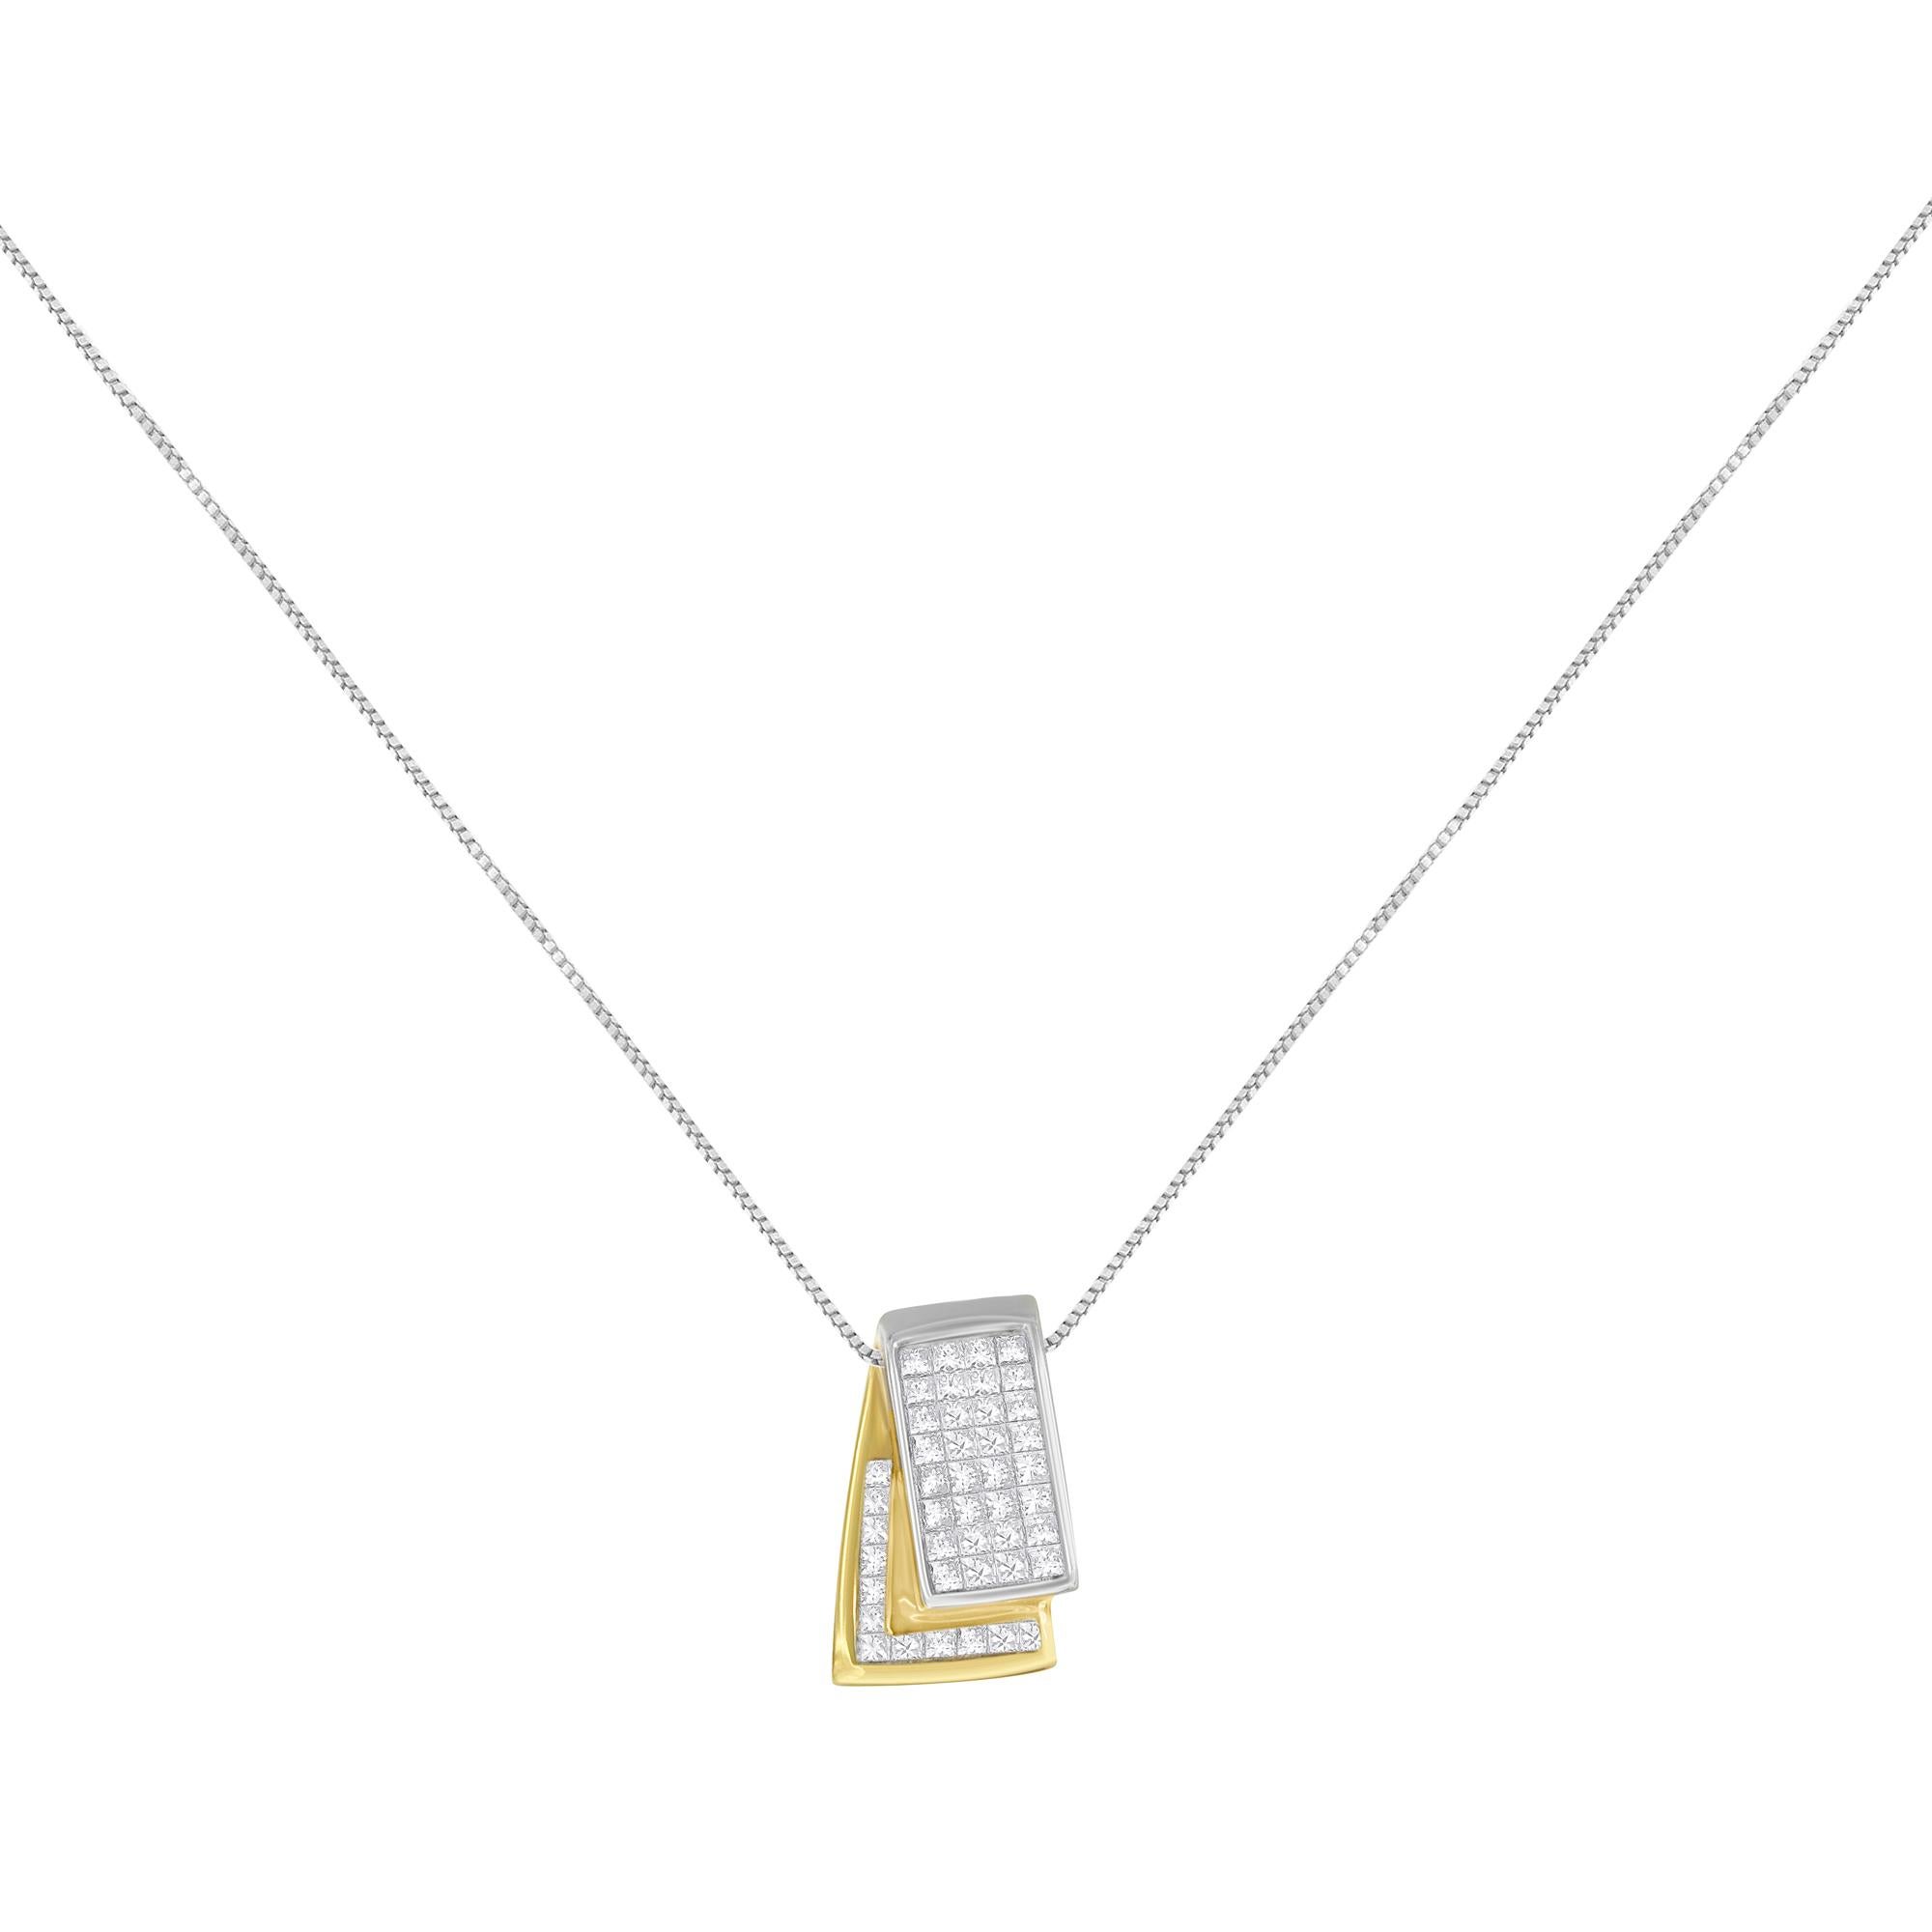 Elegant and timeless, this luxe pendant necklace boasts gorgeous princess cut diamonds in genuine 14K gold. The pendant features a dual rectangle foldover design with each rectangle filled from edge to edge with invisible set square stones. The